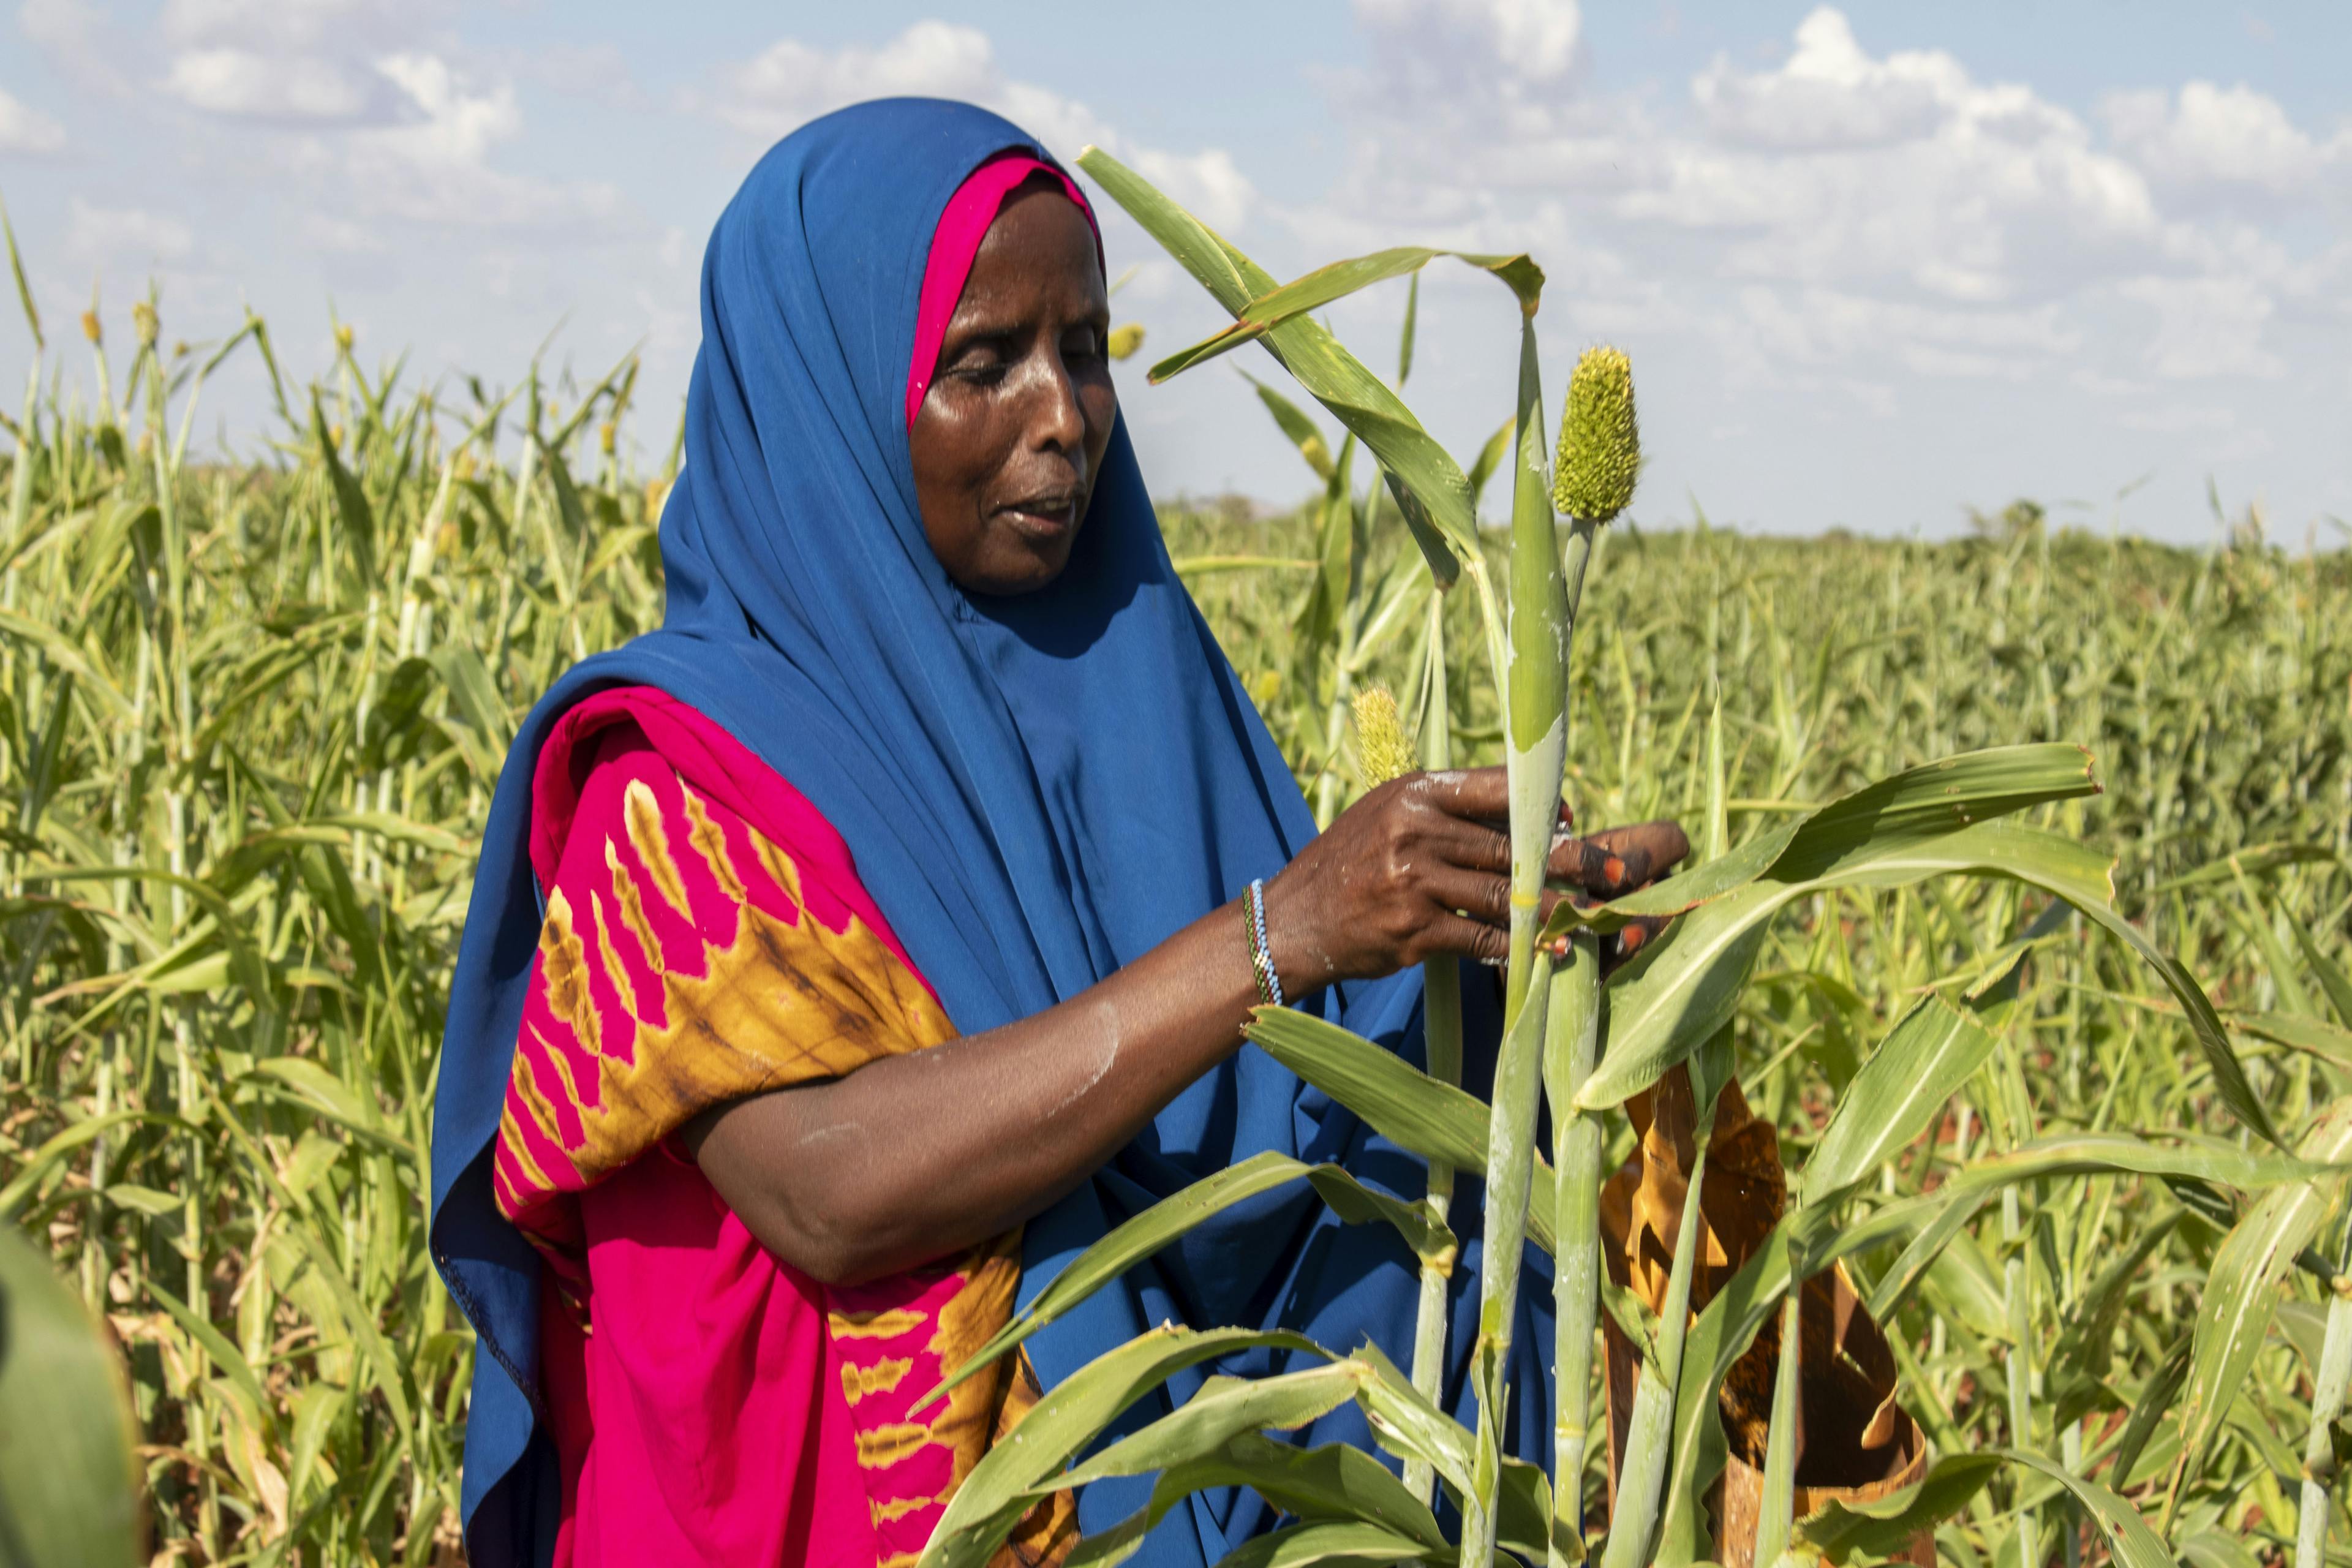 Fatuma Abdulahi Mohamed in Somalia tending to her crops of the piece of land given to her as part of the Joint Resiliency Programme.